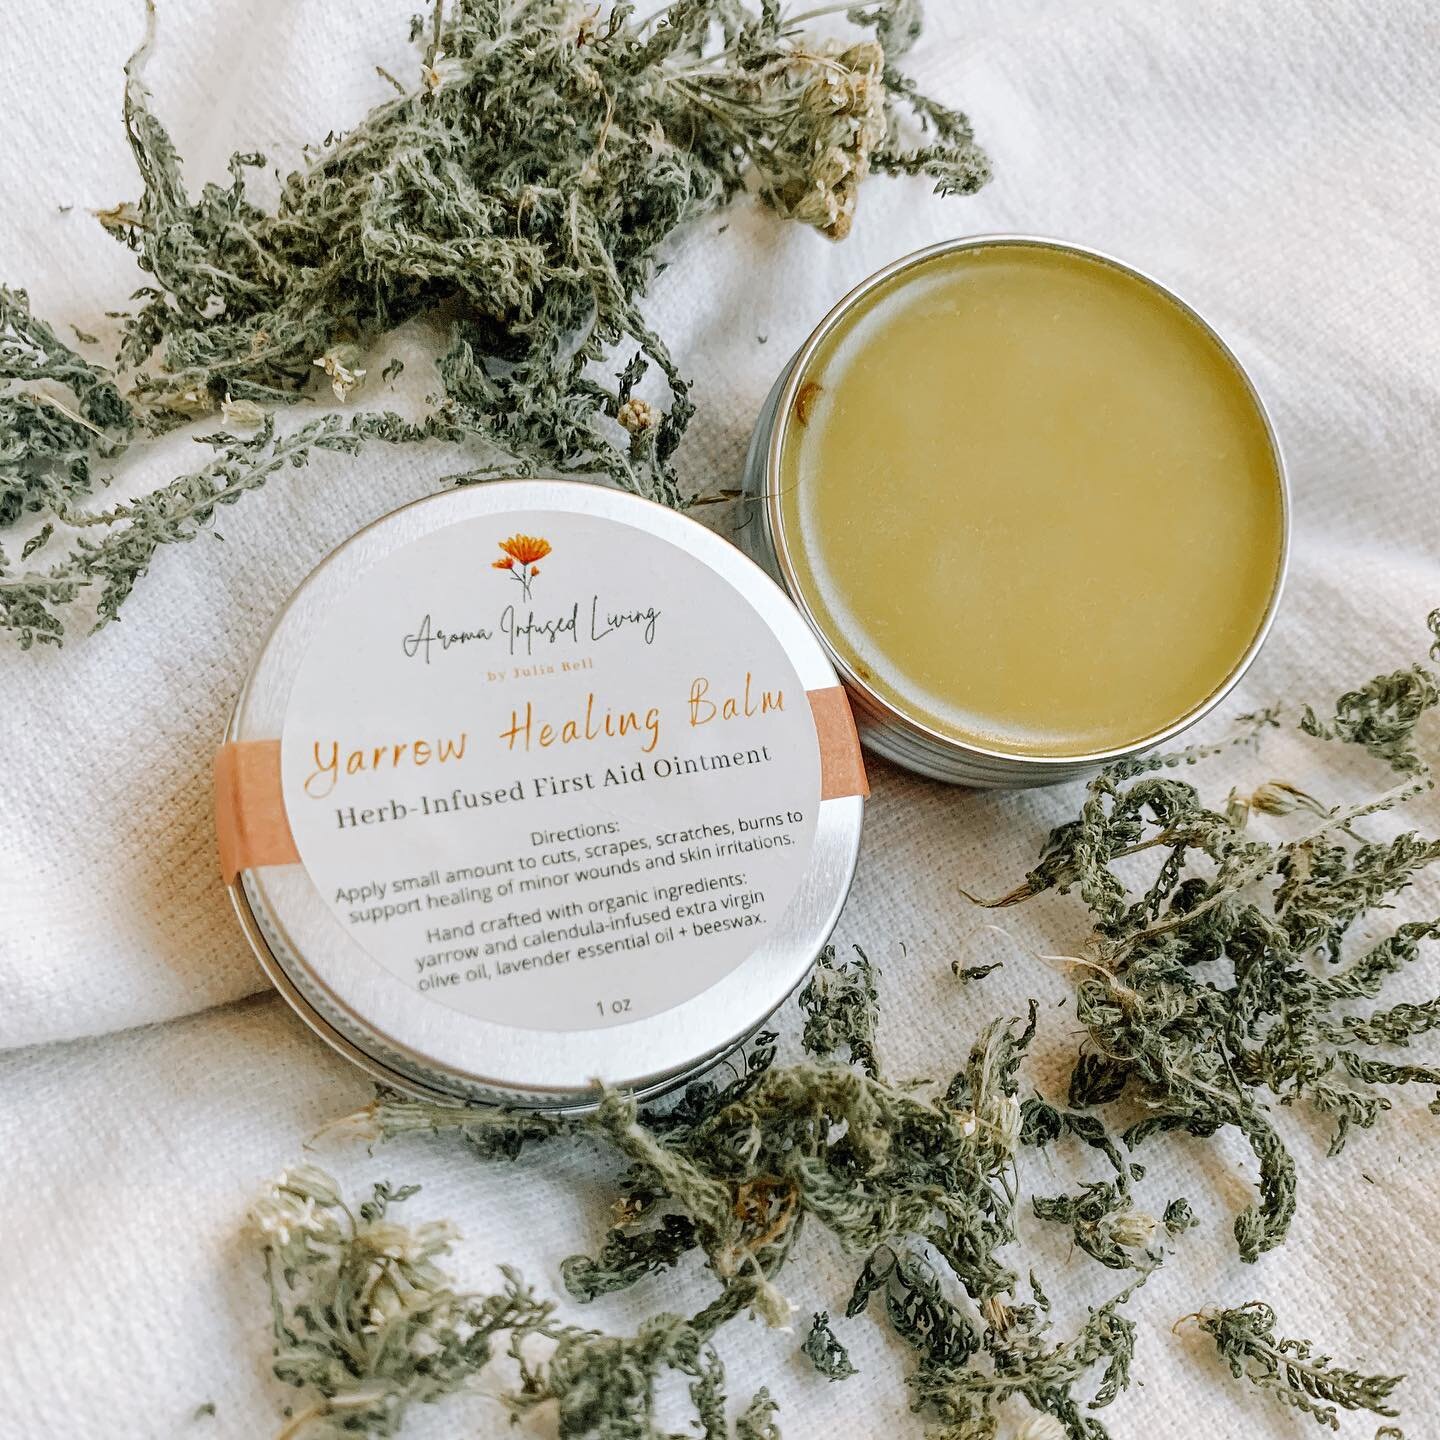 Yarrow Healing Balm 🌿 

A natural solution for all things skin ouchies: scrapes, cuts, scratches, minor burns, skin irritations, even mini puncture wounds. 

Infused with my very own yarrow and calendula infused extra virgin olive oil, soothing bees